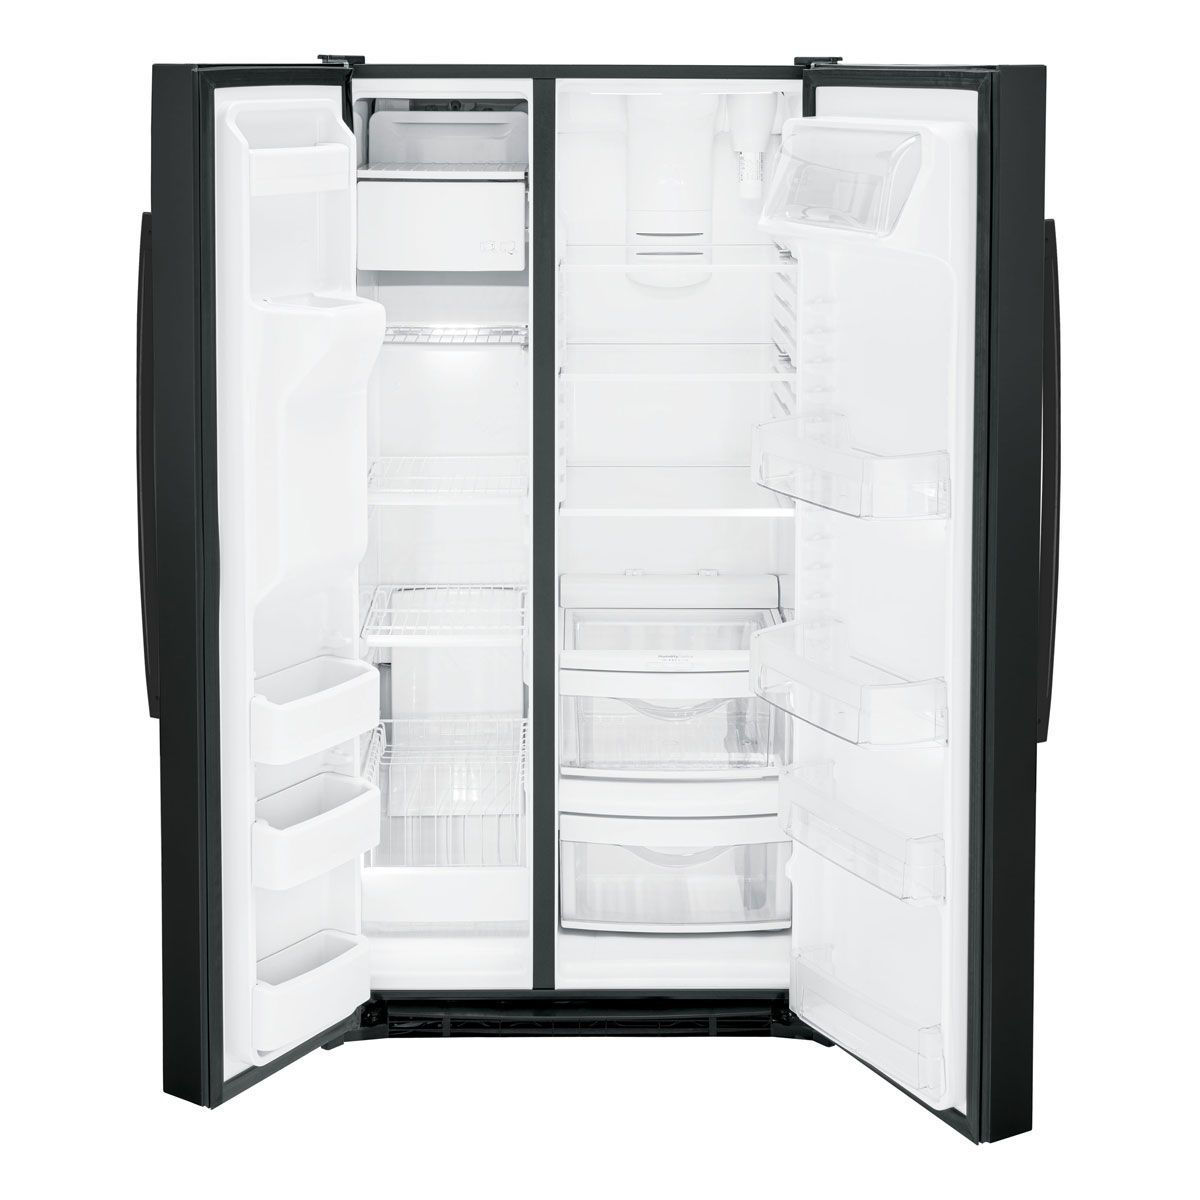 G.E. SIDE BY SIDE REFRIGERATOR | Badcock Home Furniture &more